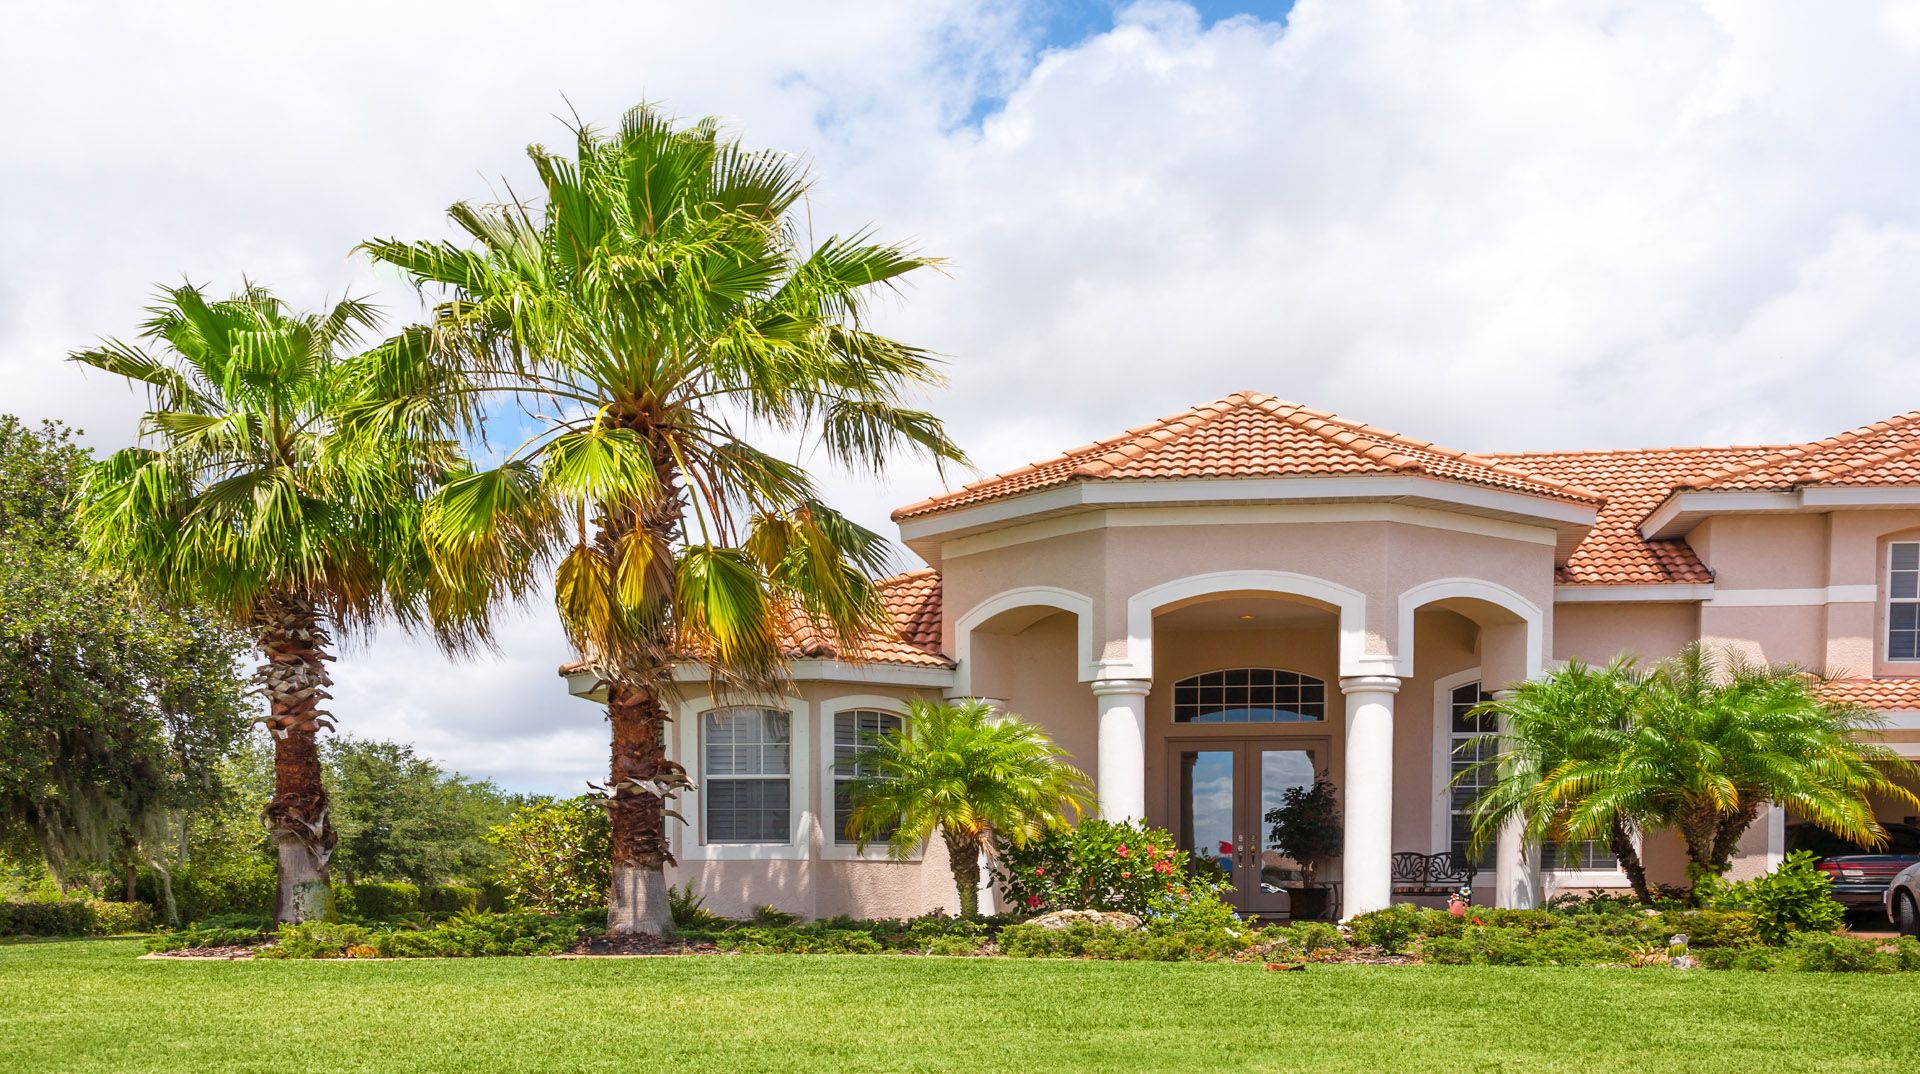 fort pierce mortgage, mortgage rates fort pierce, fort pierce mortgage broker, fort pierce mortgage lender, fort pierce mortgage calculator, fort pierce condo financing, fort pierce condotel financing, fort pierce condo mortgage, fort pierce condotel mortgage,